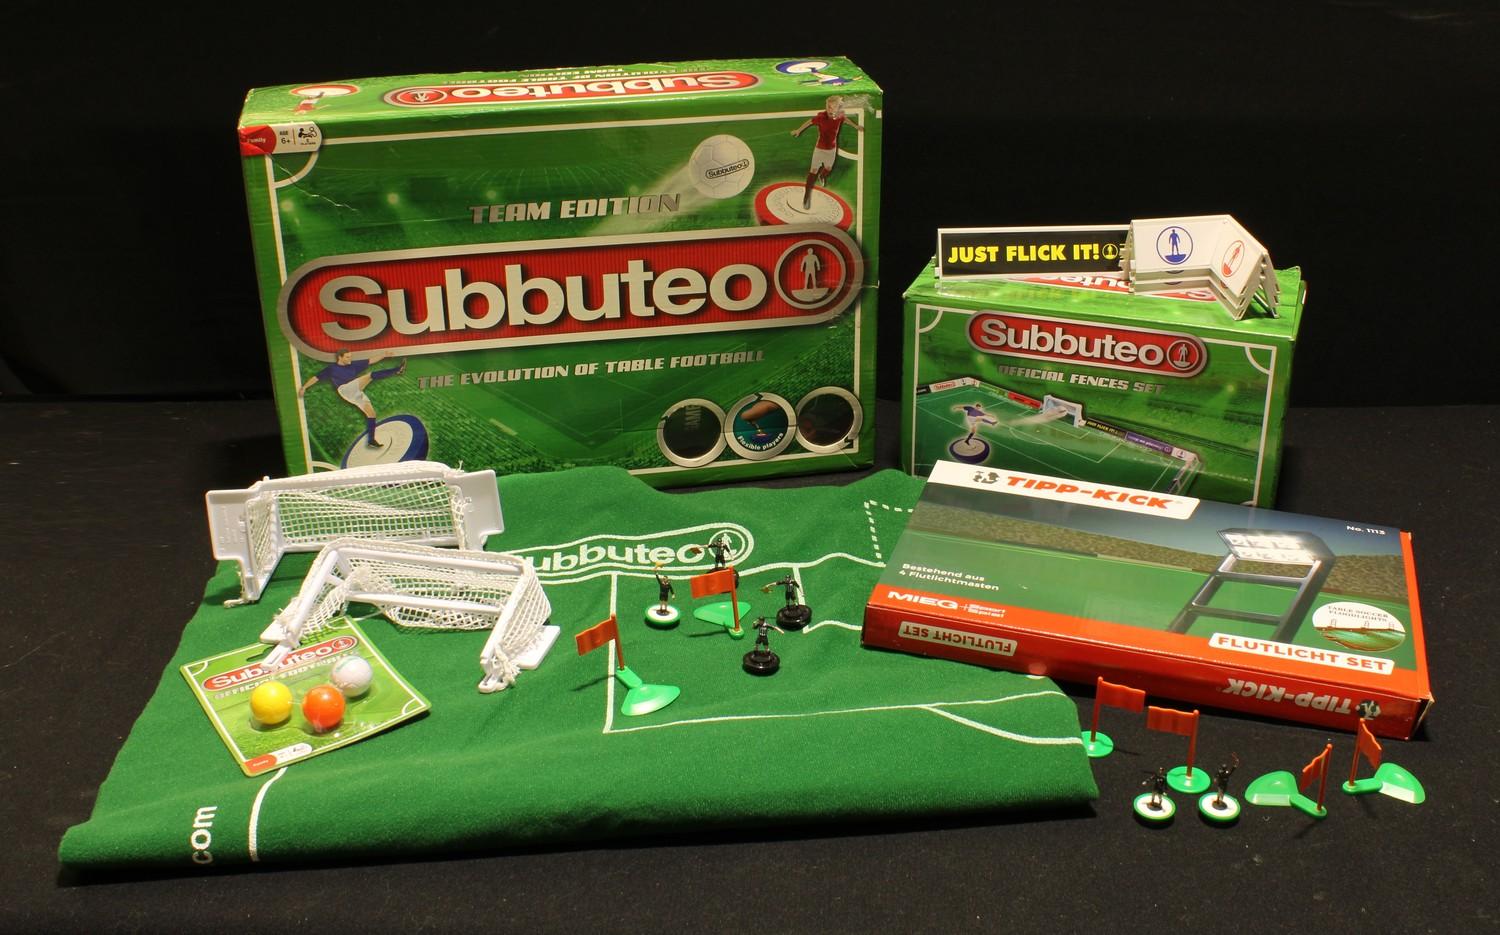 Toys - Subbuteo Team Edition table football game, boxed; Subbuteo official fences set, boxed and a